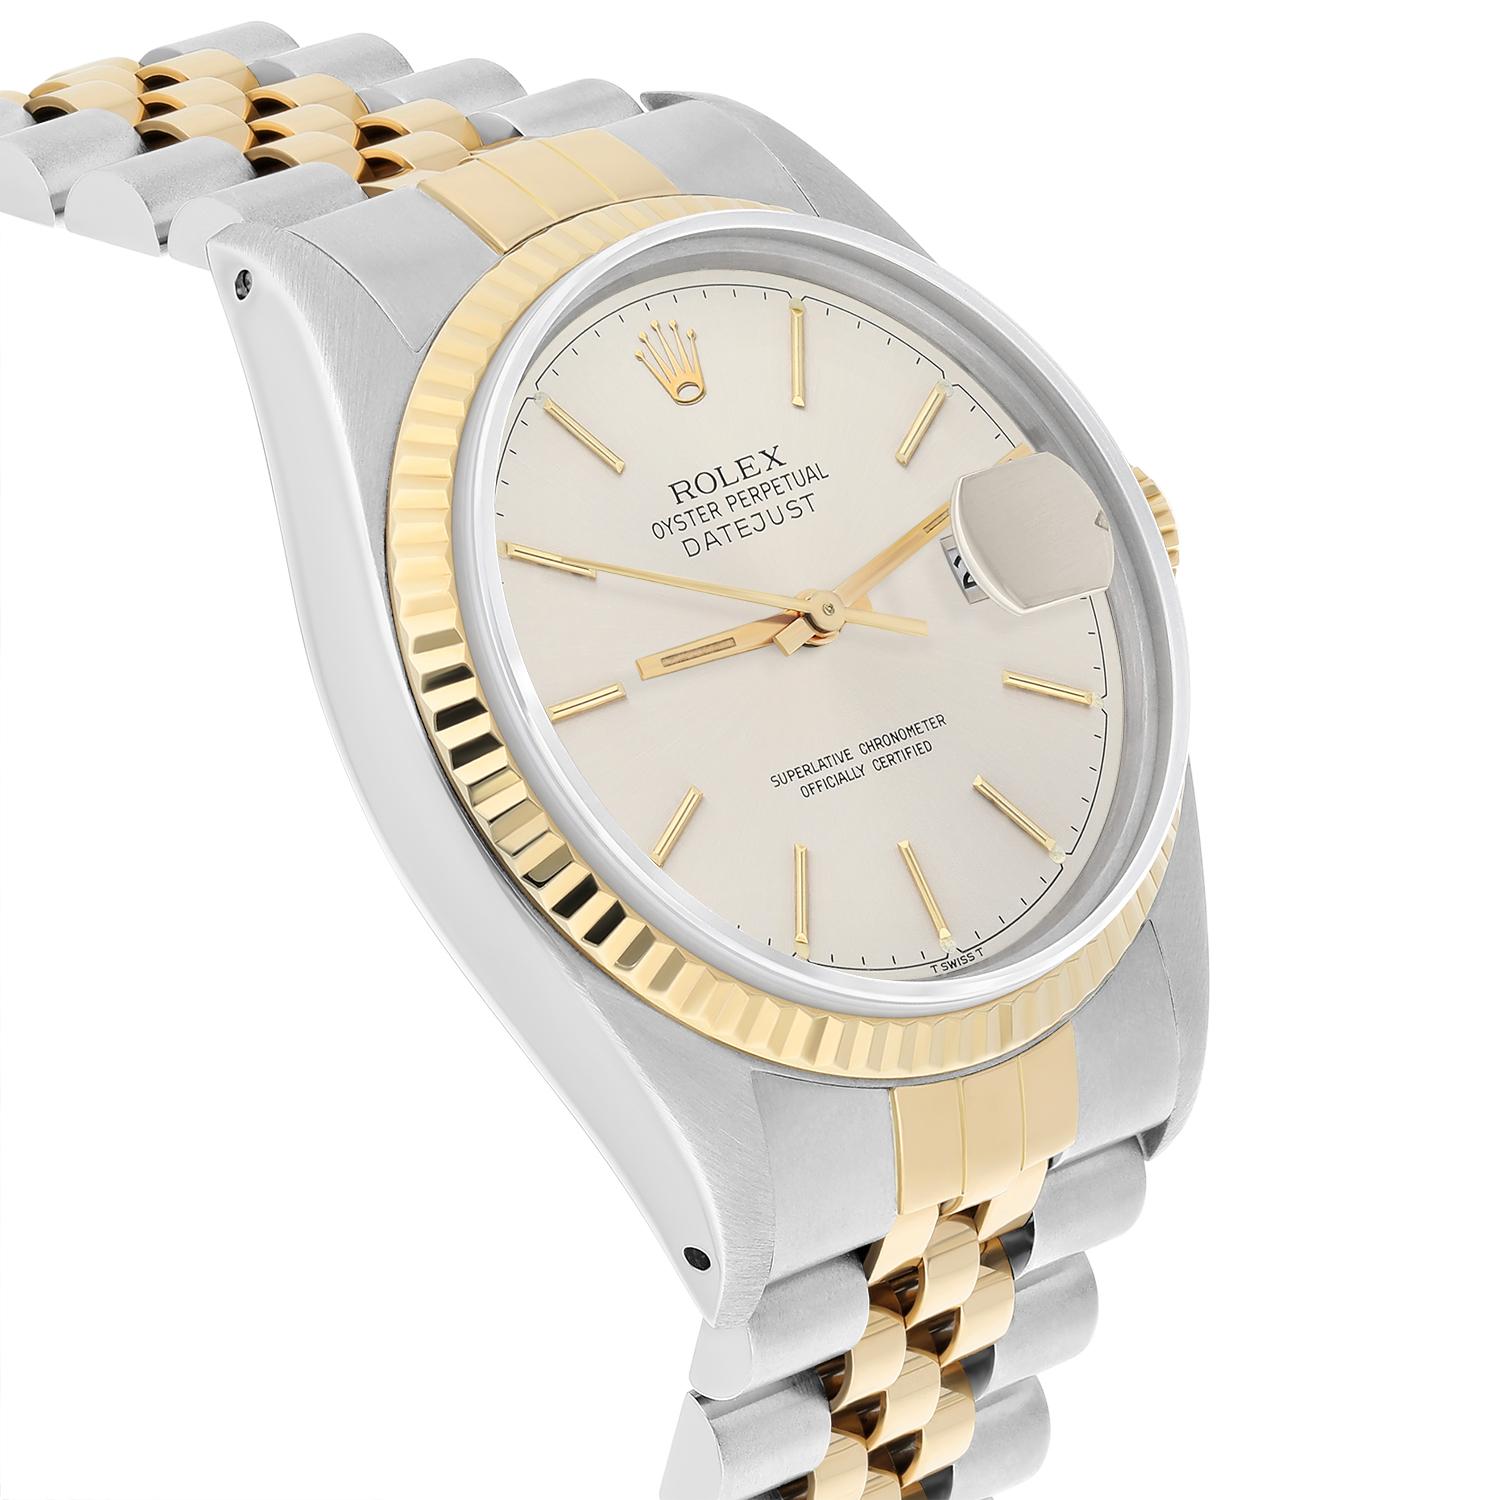 Rolex Datejust 36 Two Tone Silver lndex Dial Jubilee 16013 Circa 1982 Complete For Sale 2